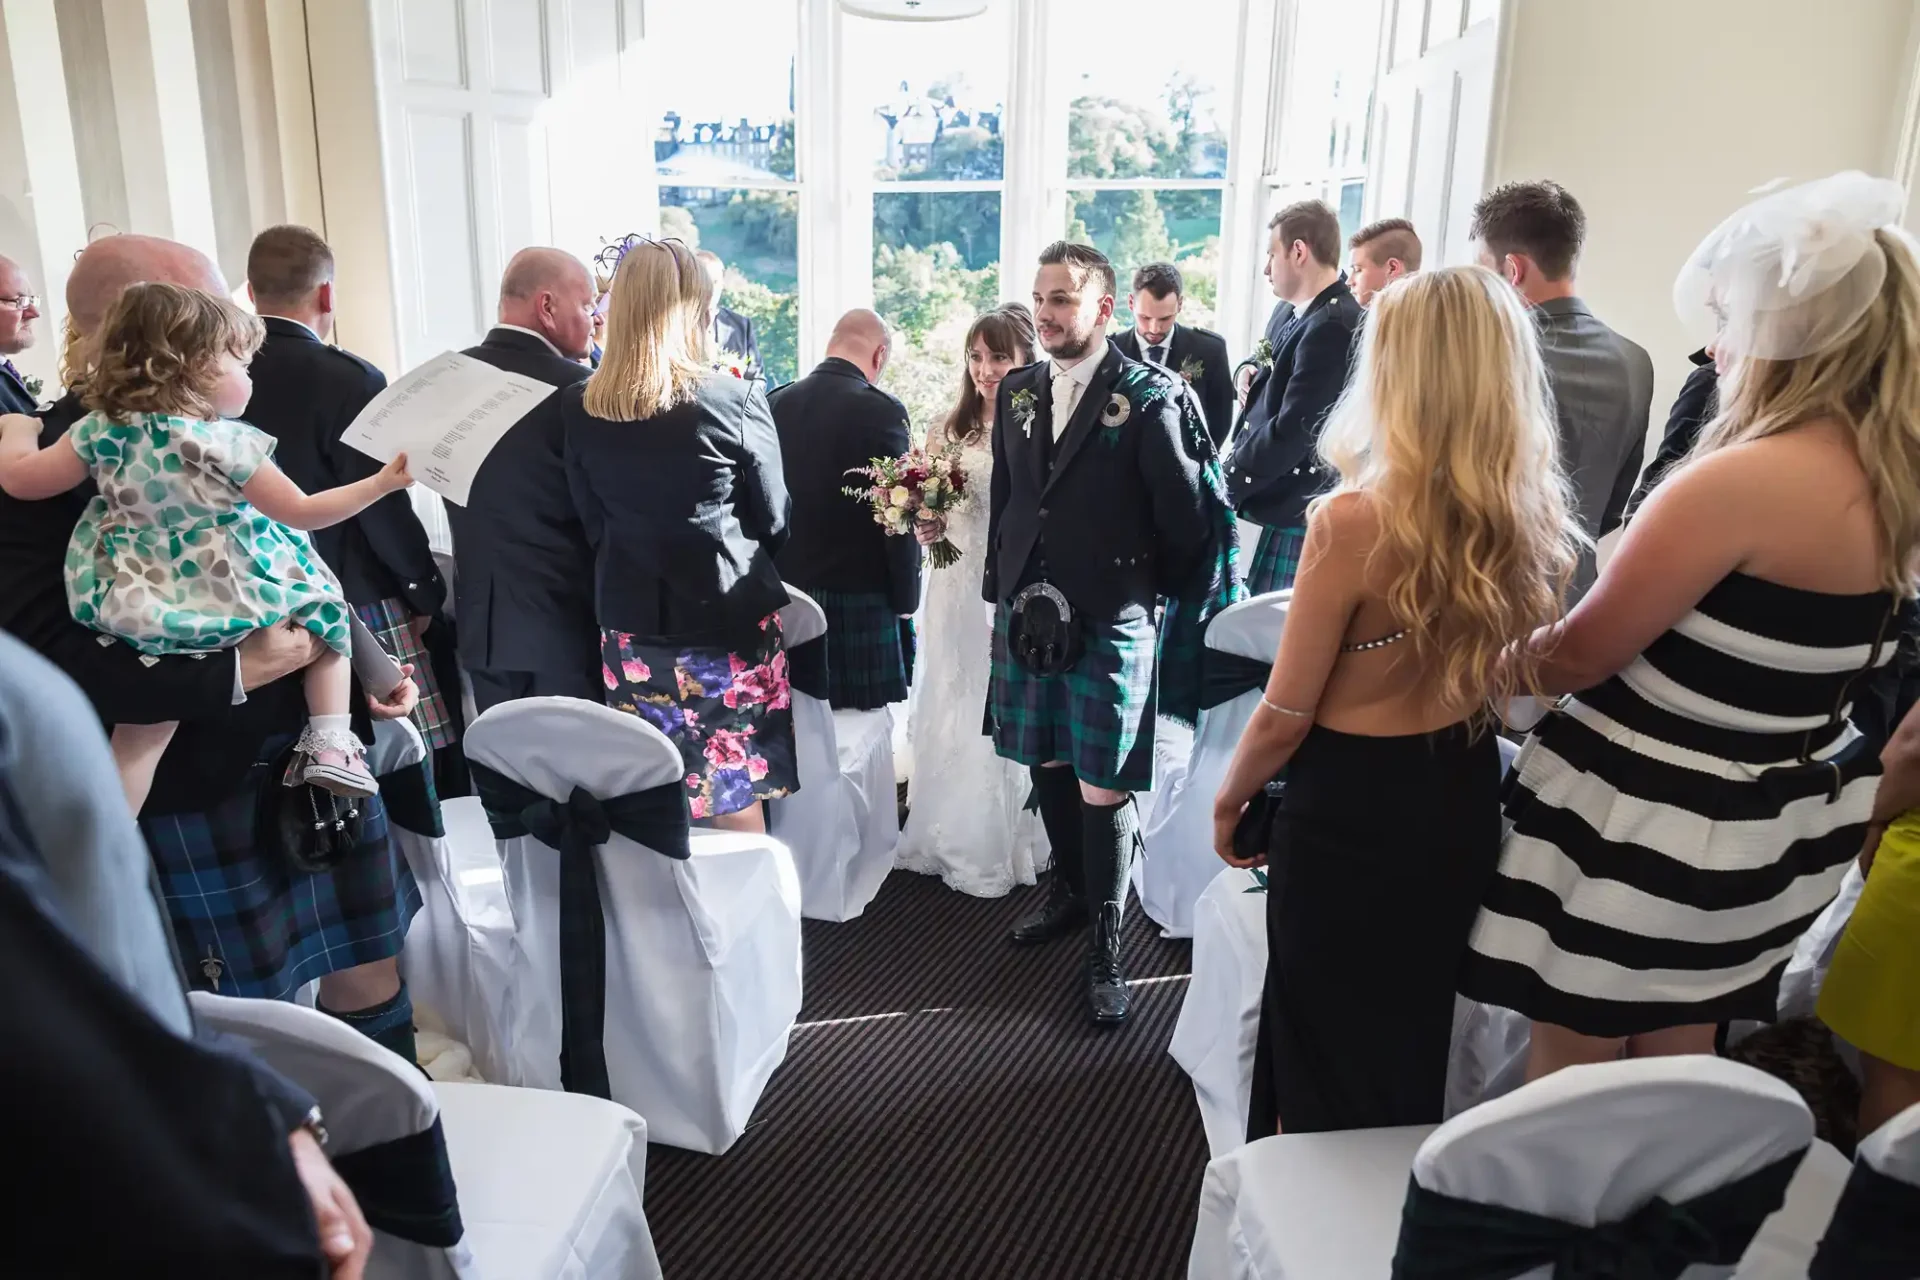 A wedding reception in a bright room with guests in formal attire, some wearing kilts; a couple walks down the aisle, greeted warmly by attendees.